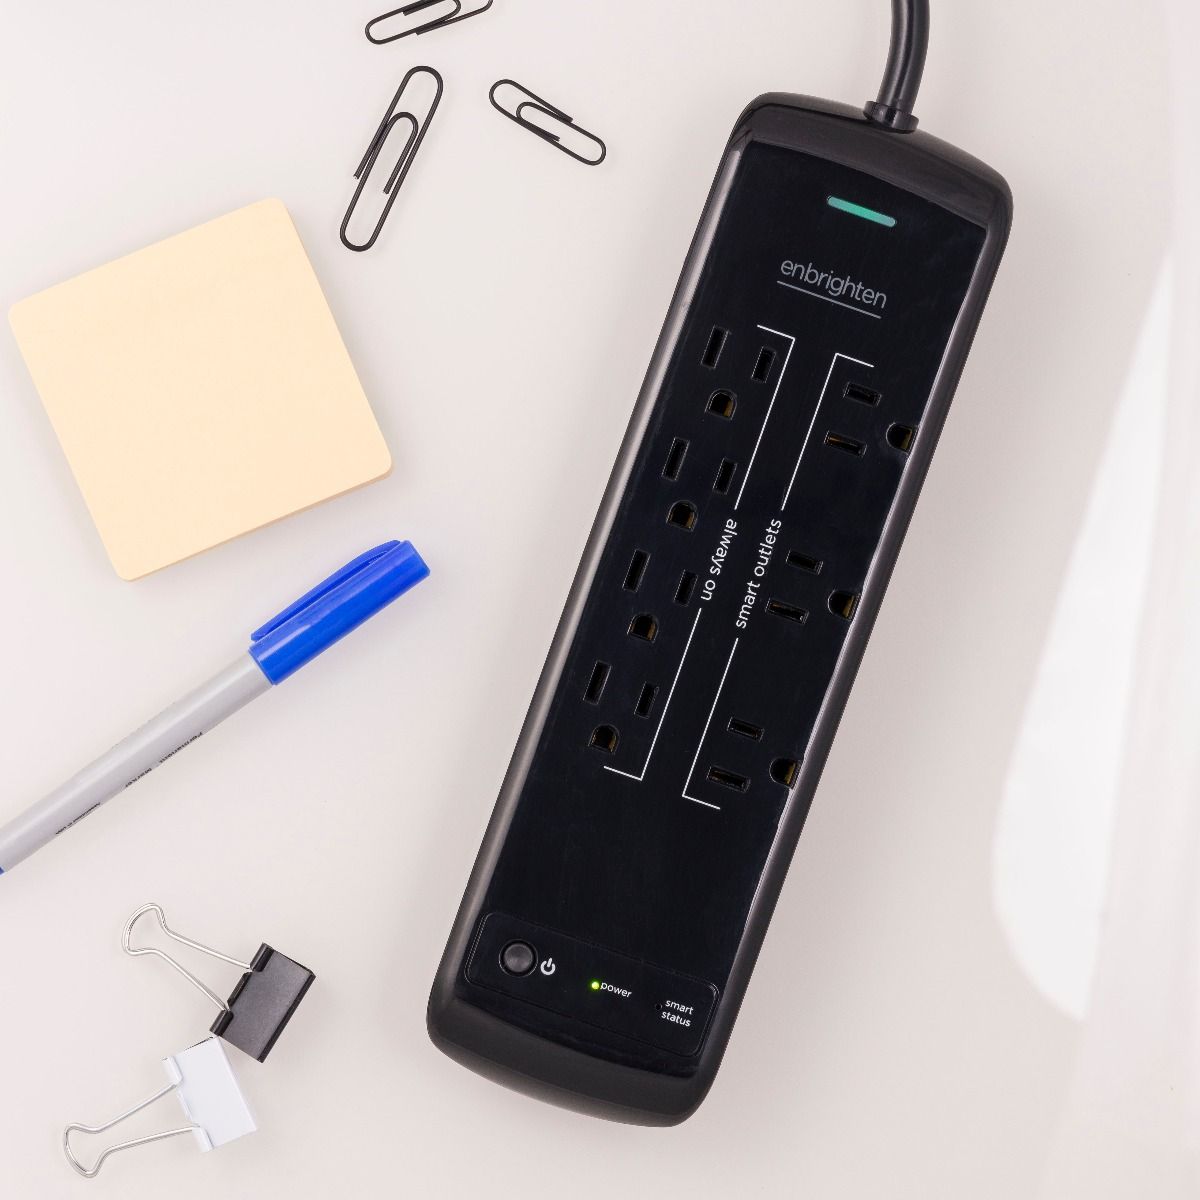 Enbrighten Elite WiFi Smart Surge Protector Power Bar with 7 Outlets - evergreenly